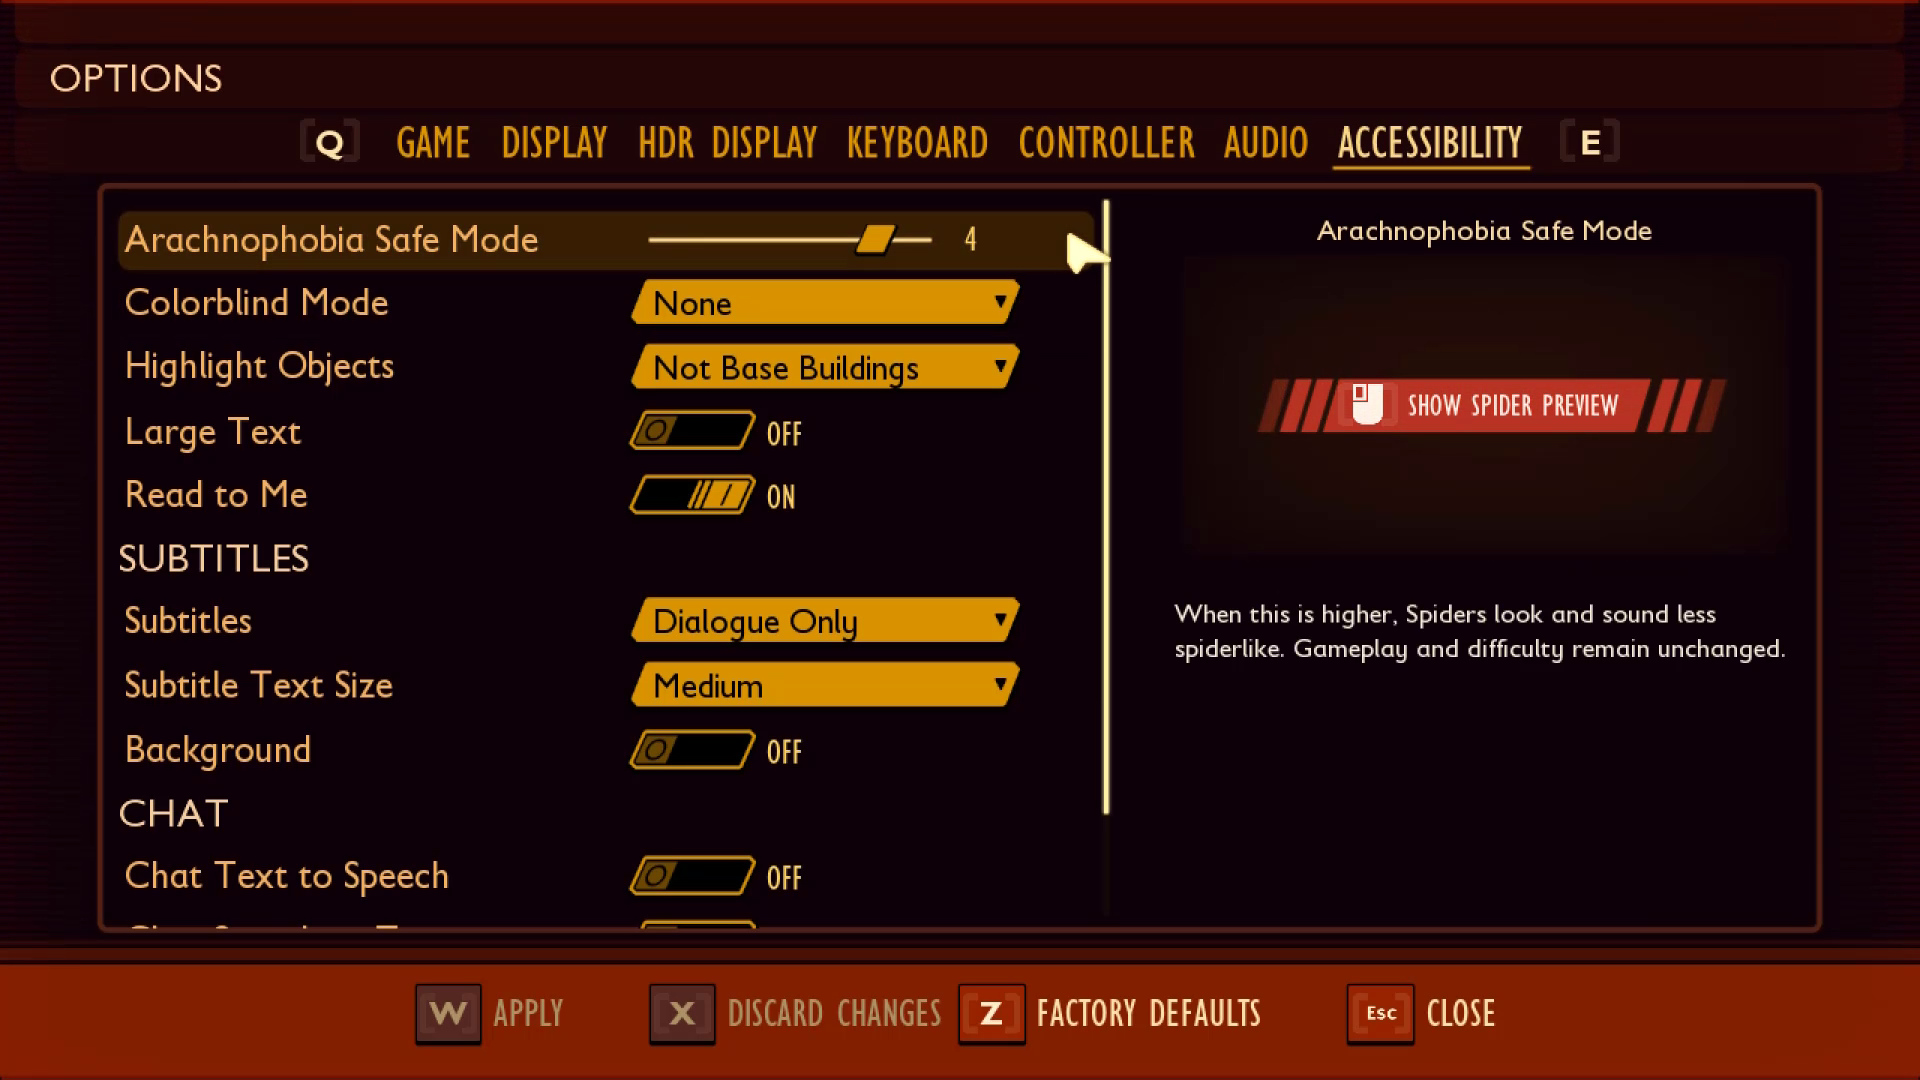 Grounded Options Menu. Accessibility sub-option screen. Text is bright yellow against a dark brown background. 